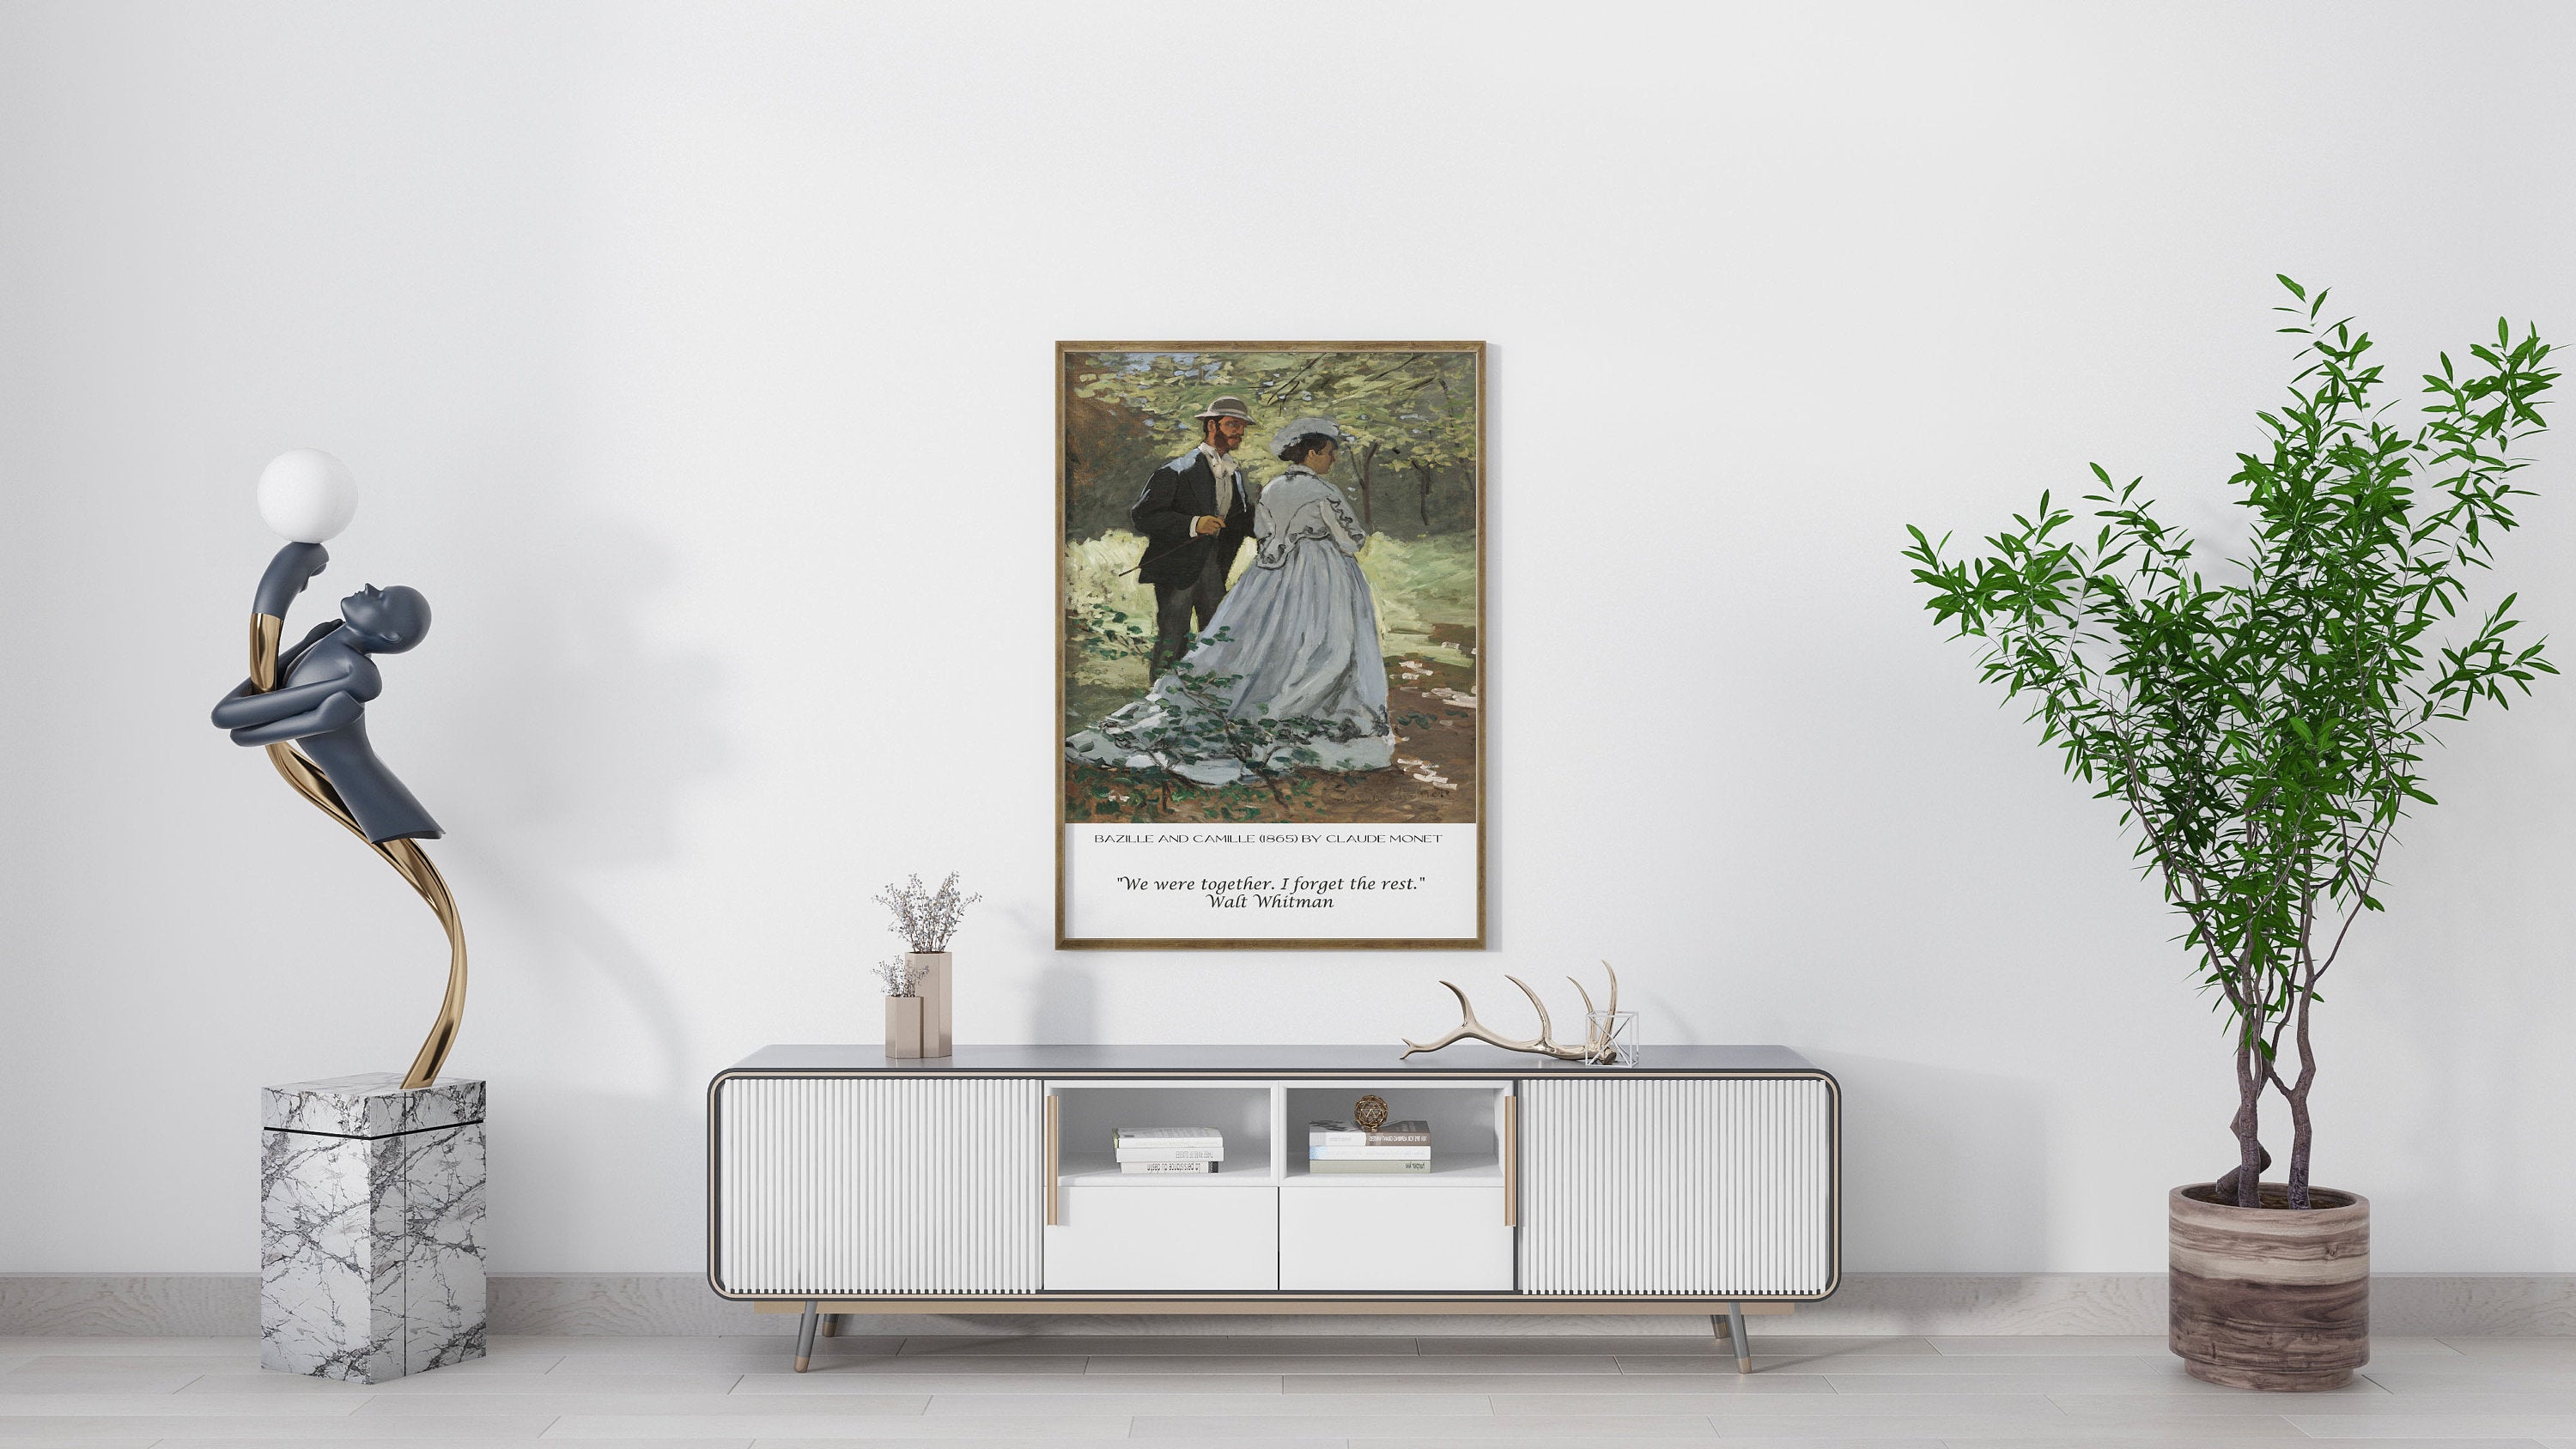 Walt Whitman - Claude Monet Fine Art Print - Bazille and Camille, We Were Together I Forget The Rest